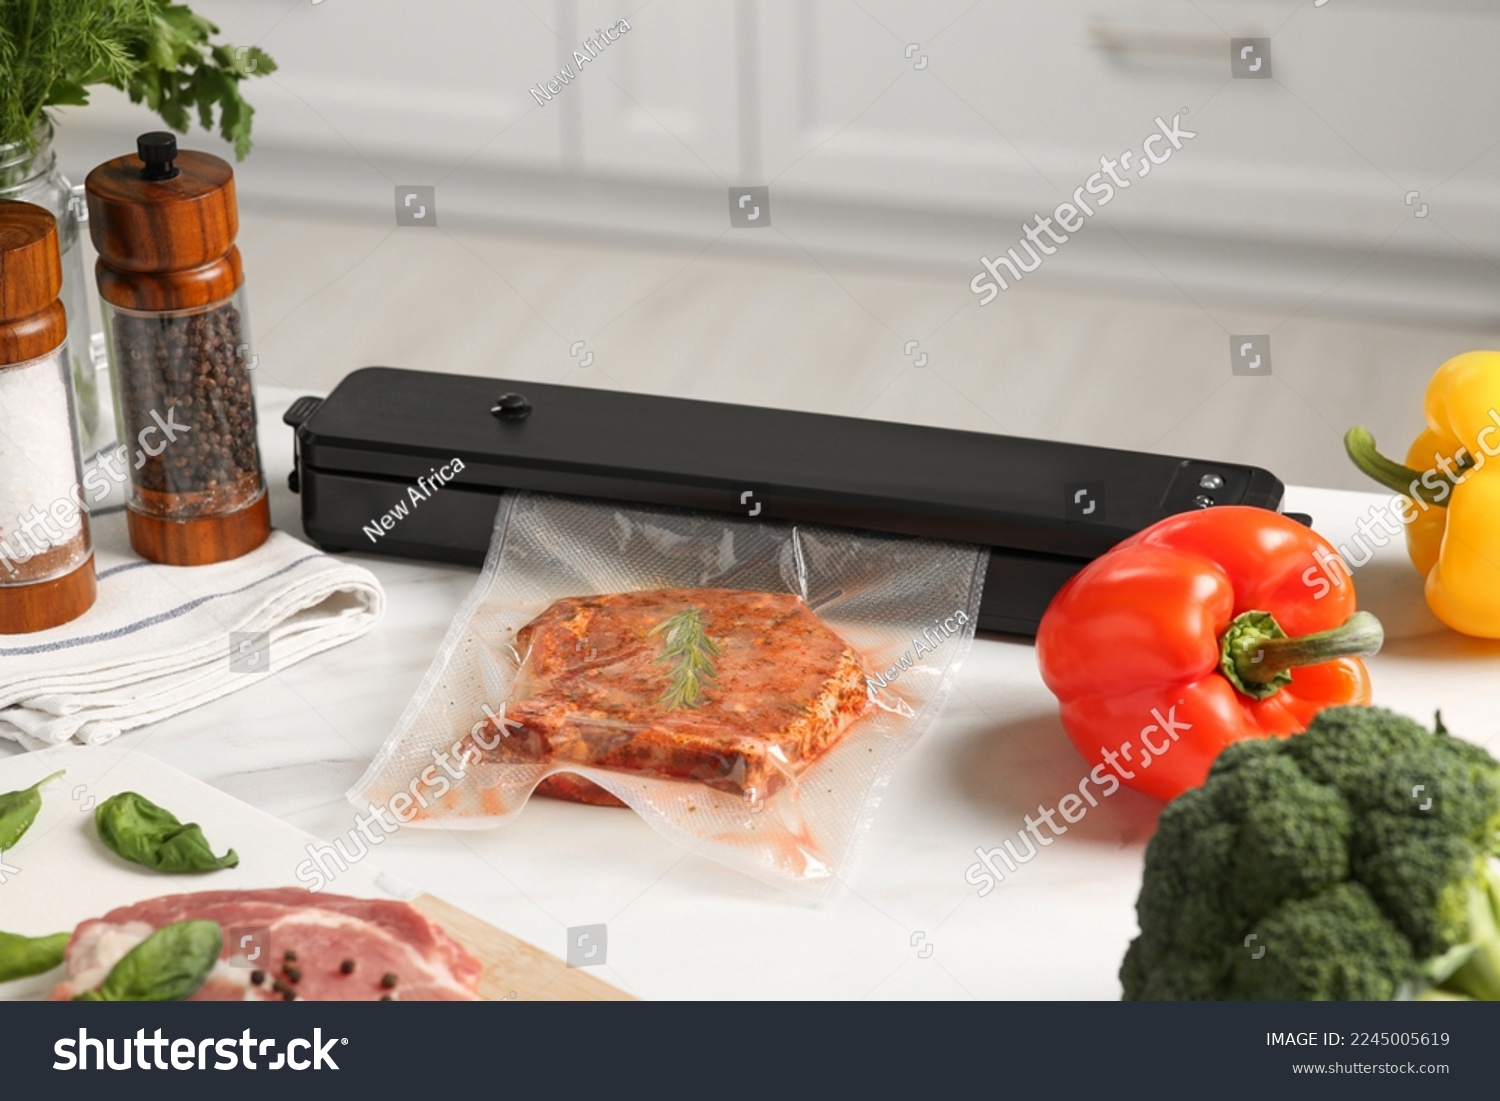 Sealer for vacuum packing with meat in plastic bag on white kitchen table #2245005619